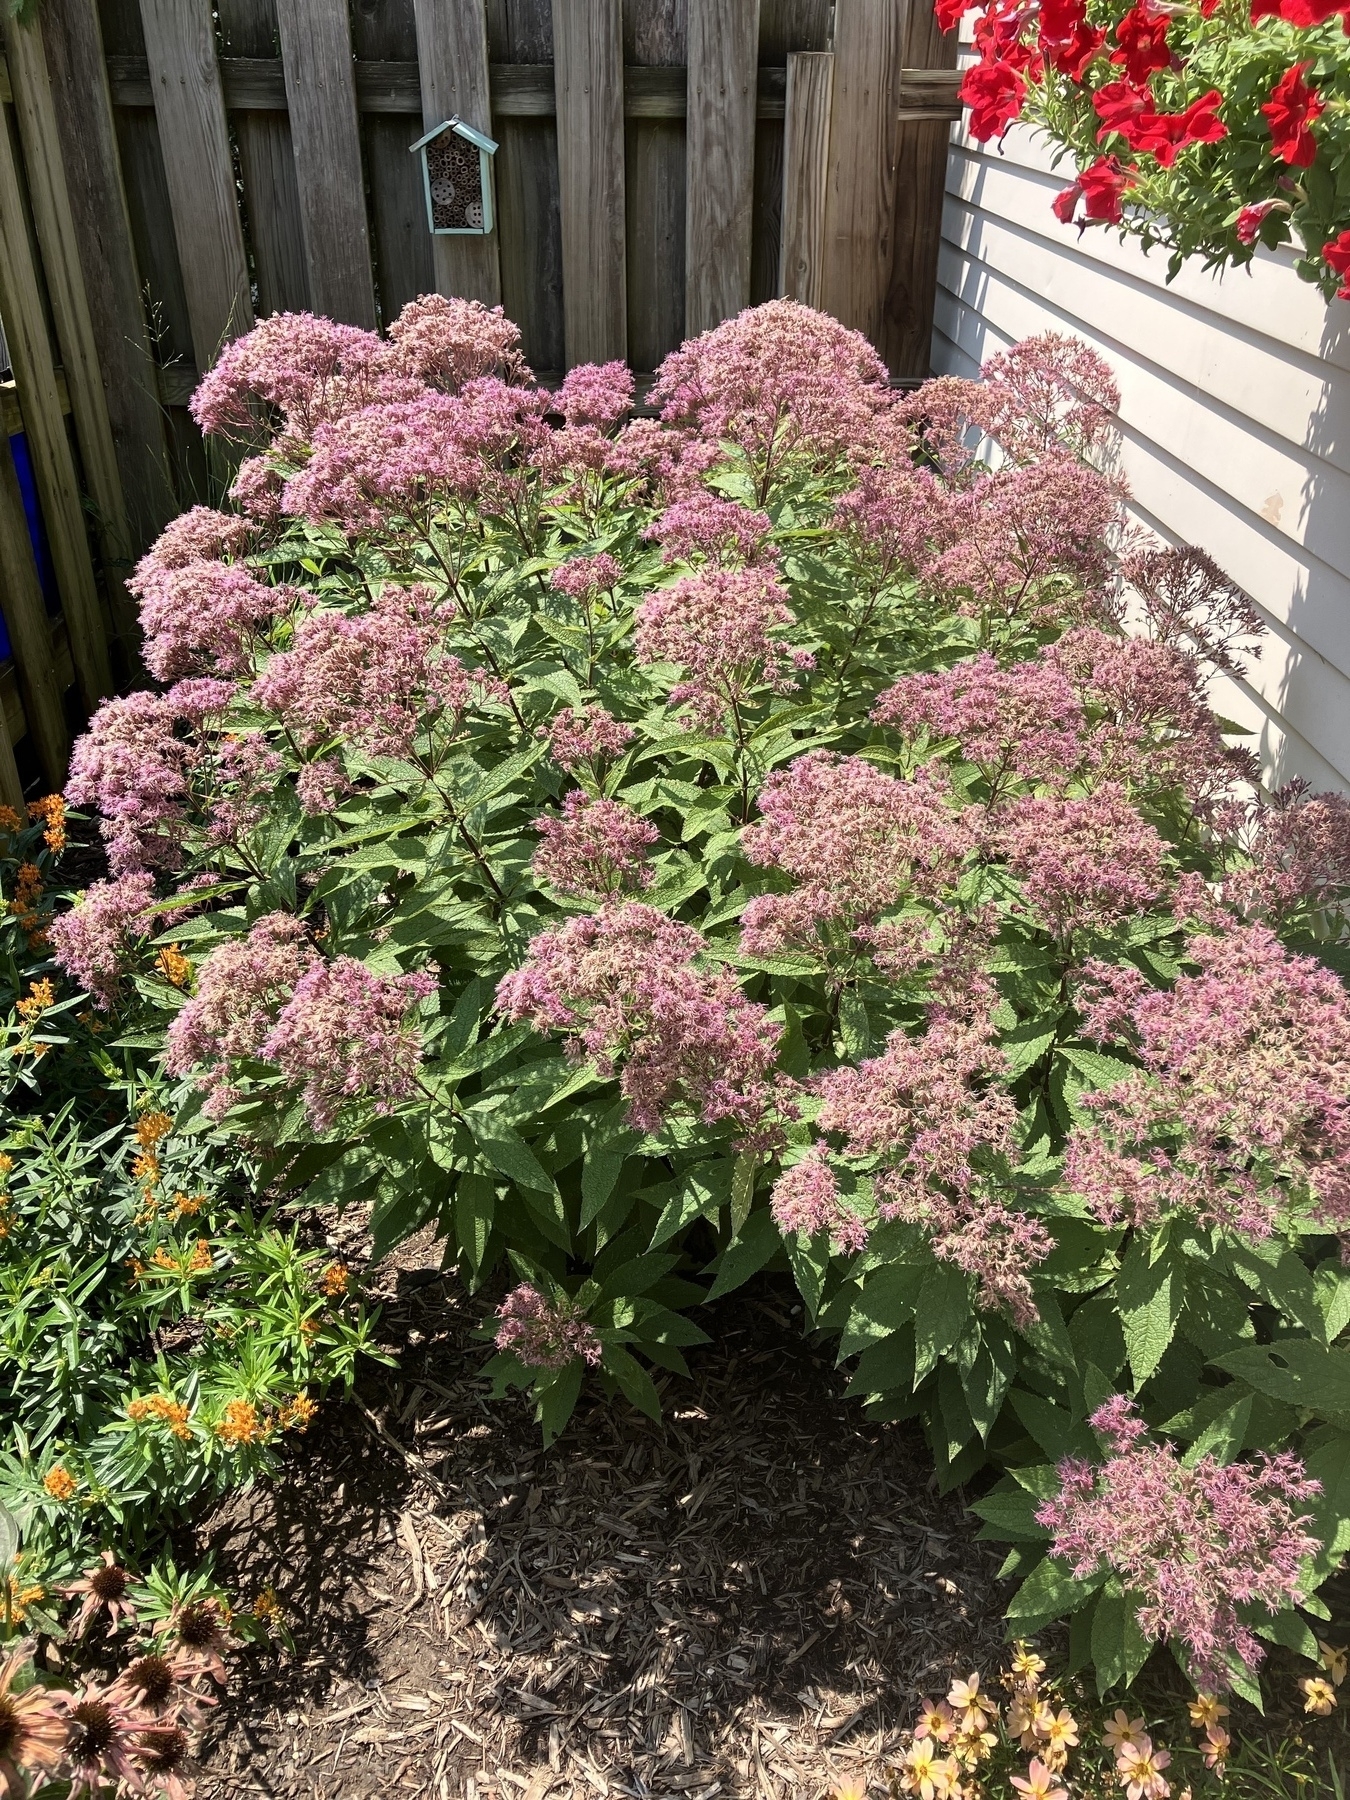 Plant with green stems and leaves and light purple, wispy blooms